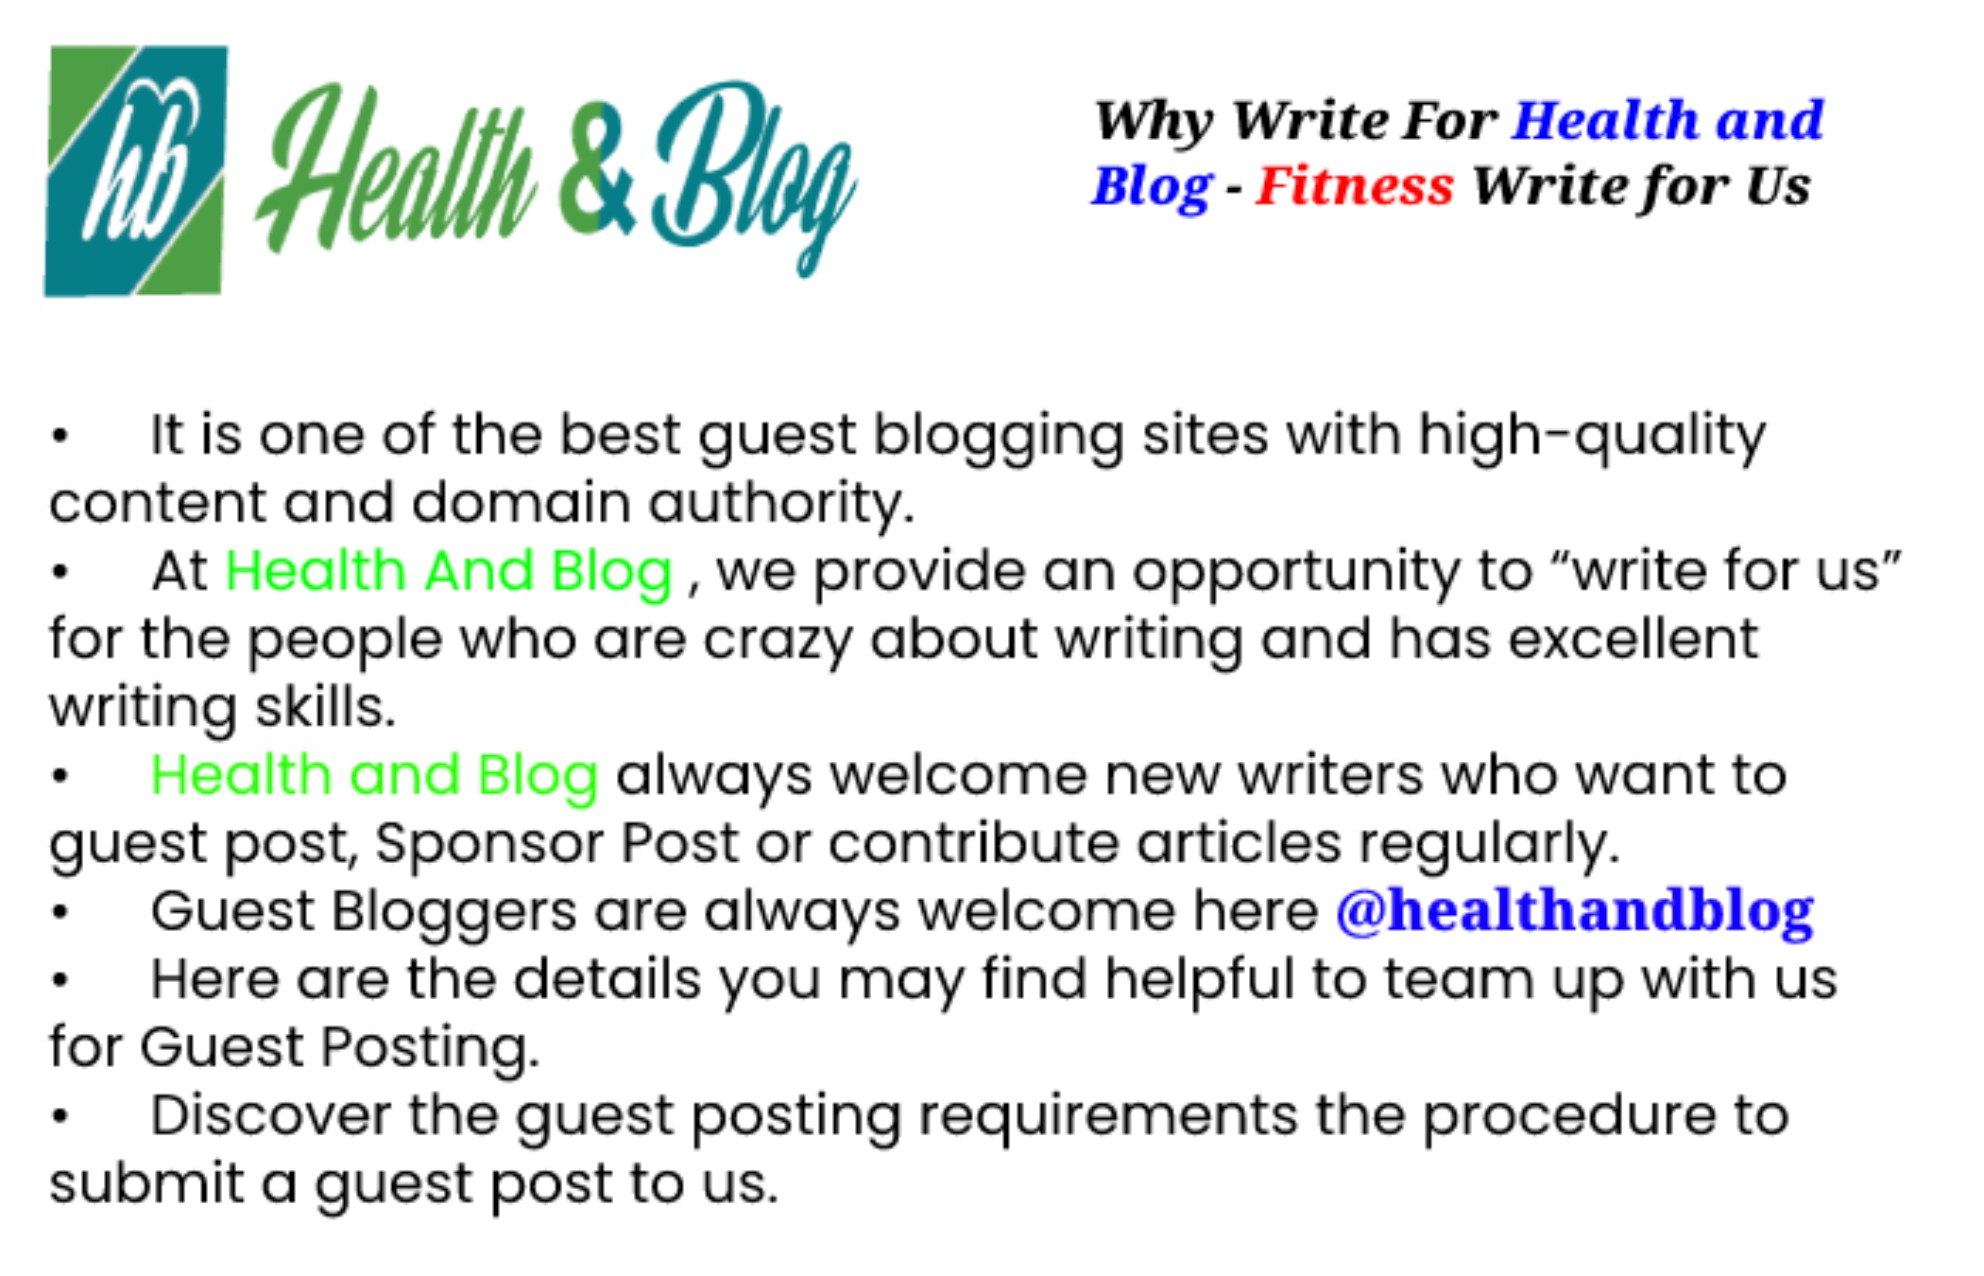 Why to Write for Health and Blog – Fitness Write For Us